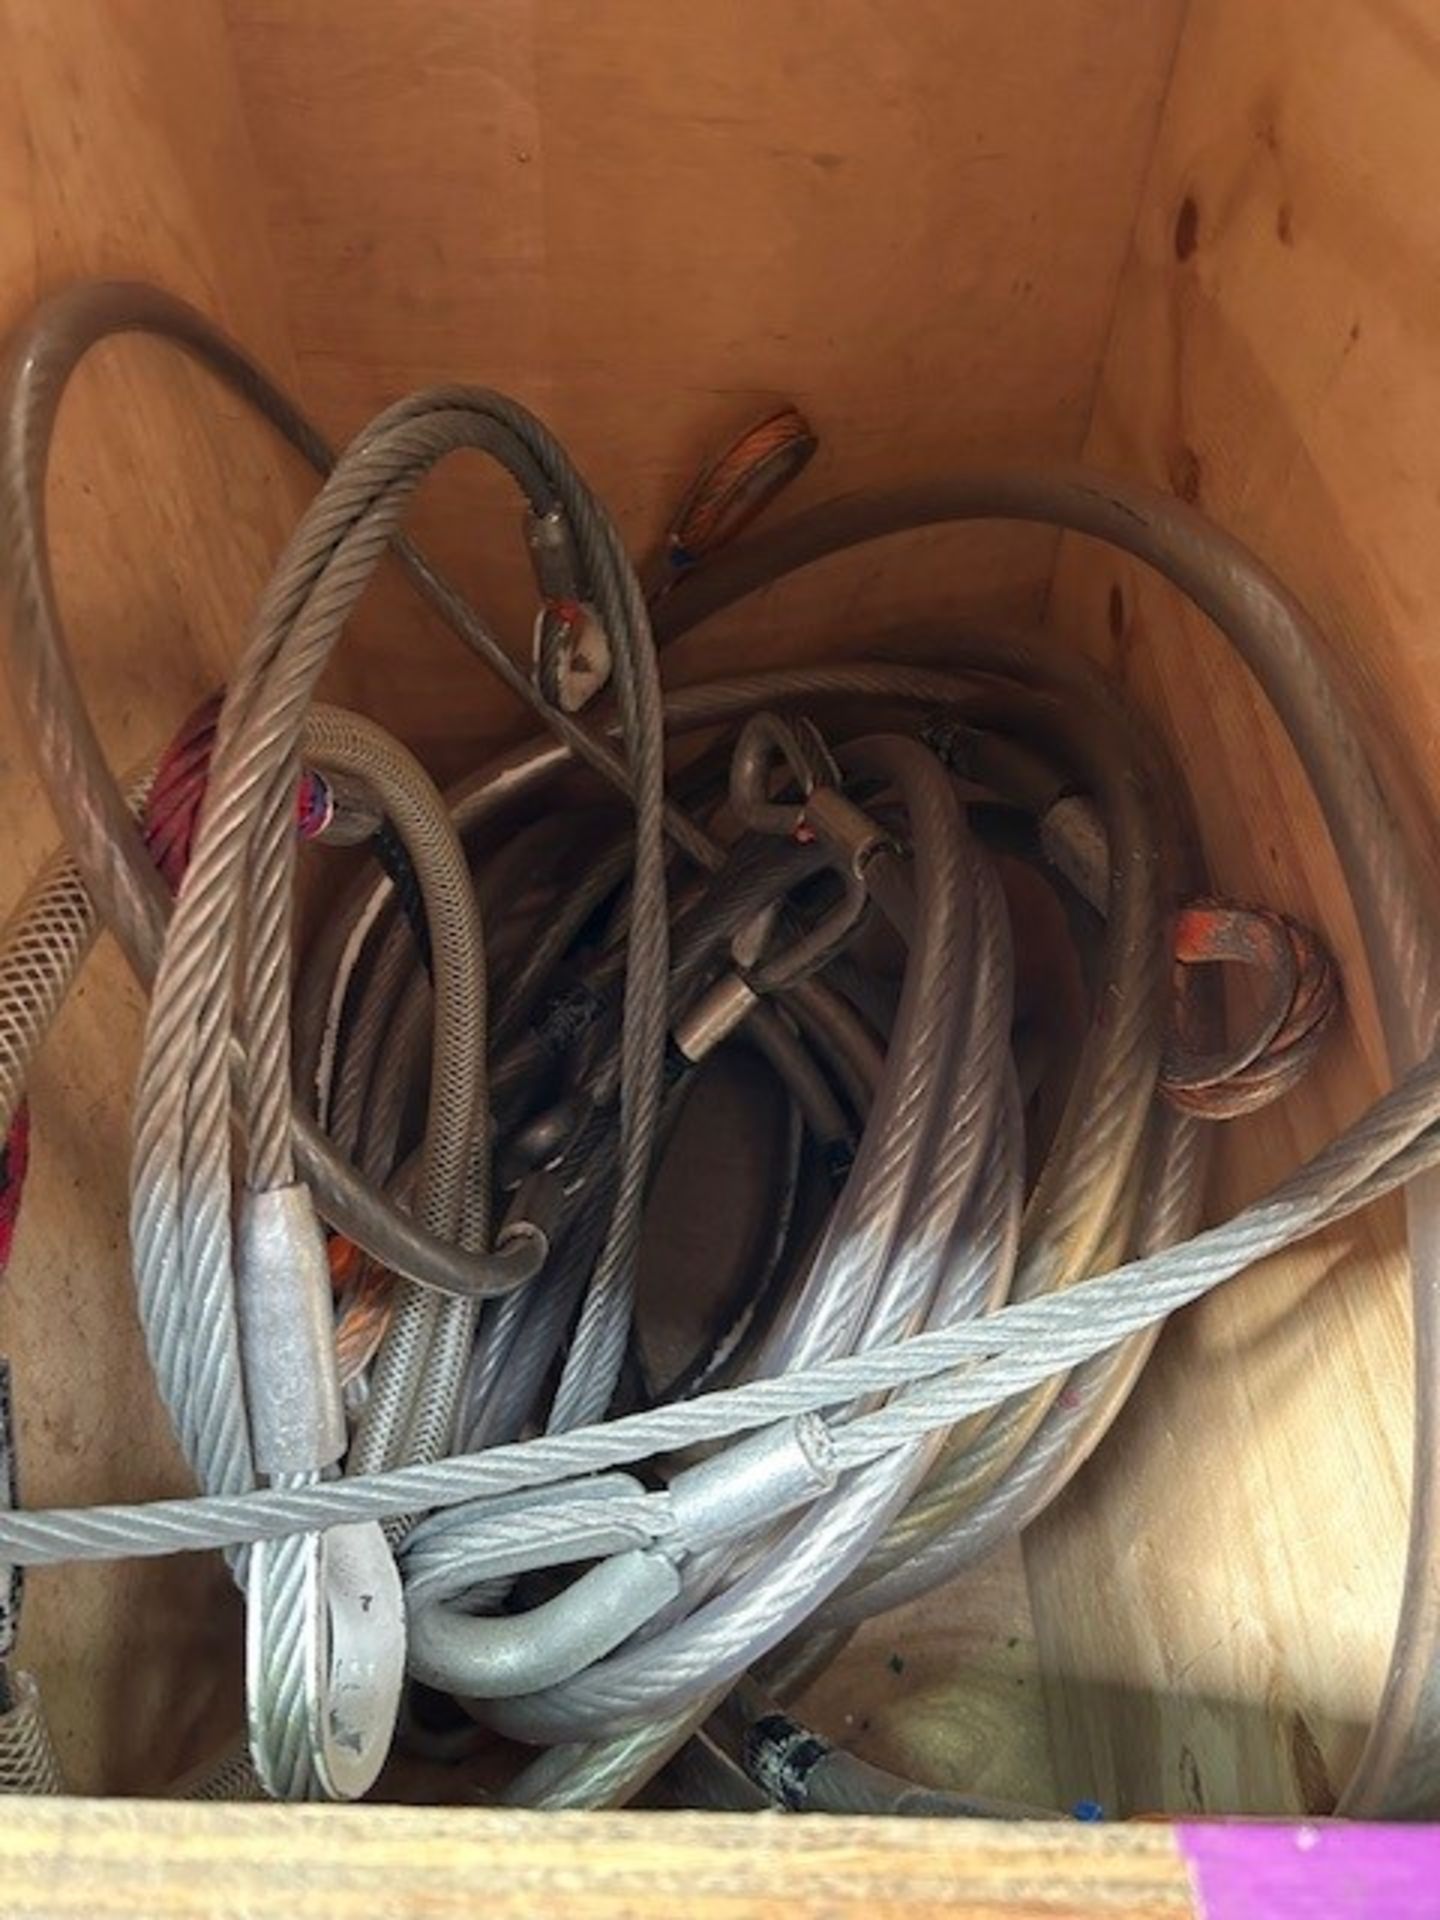 Contents Of Rigging Rack - Image 16 of 17